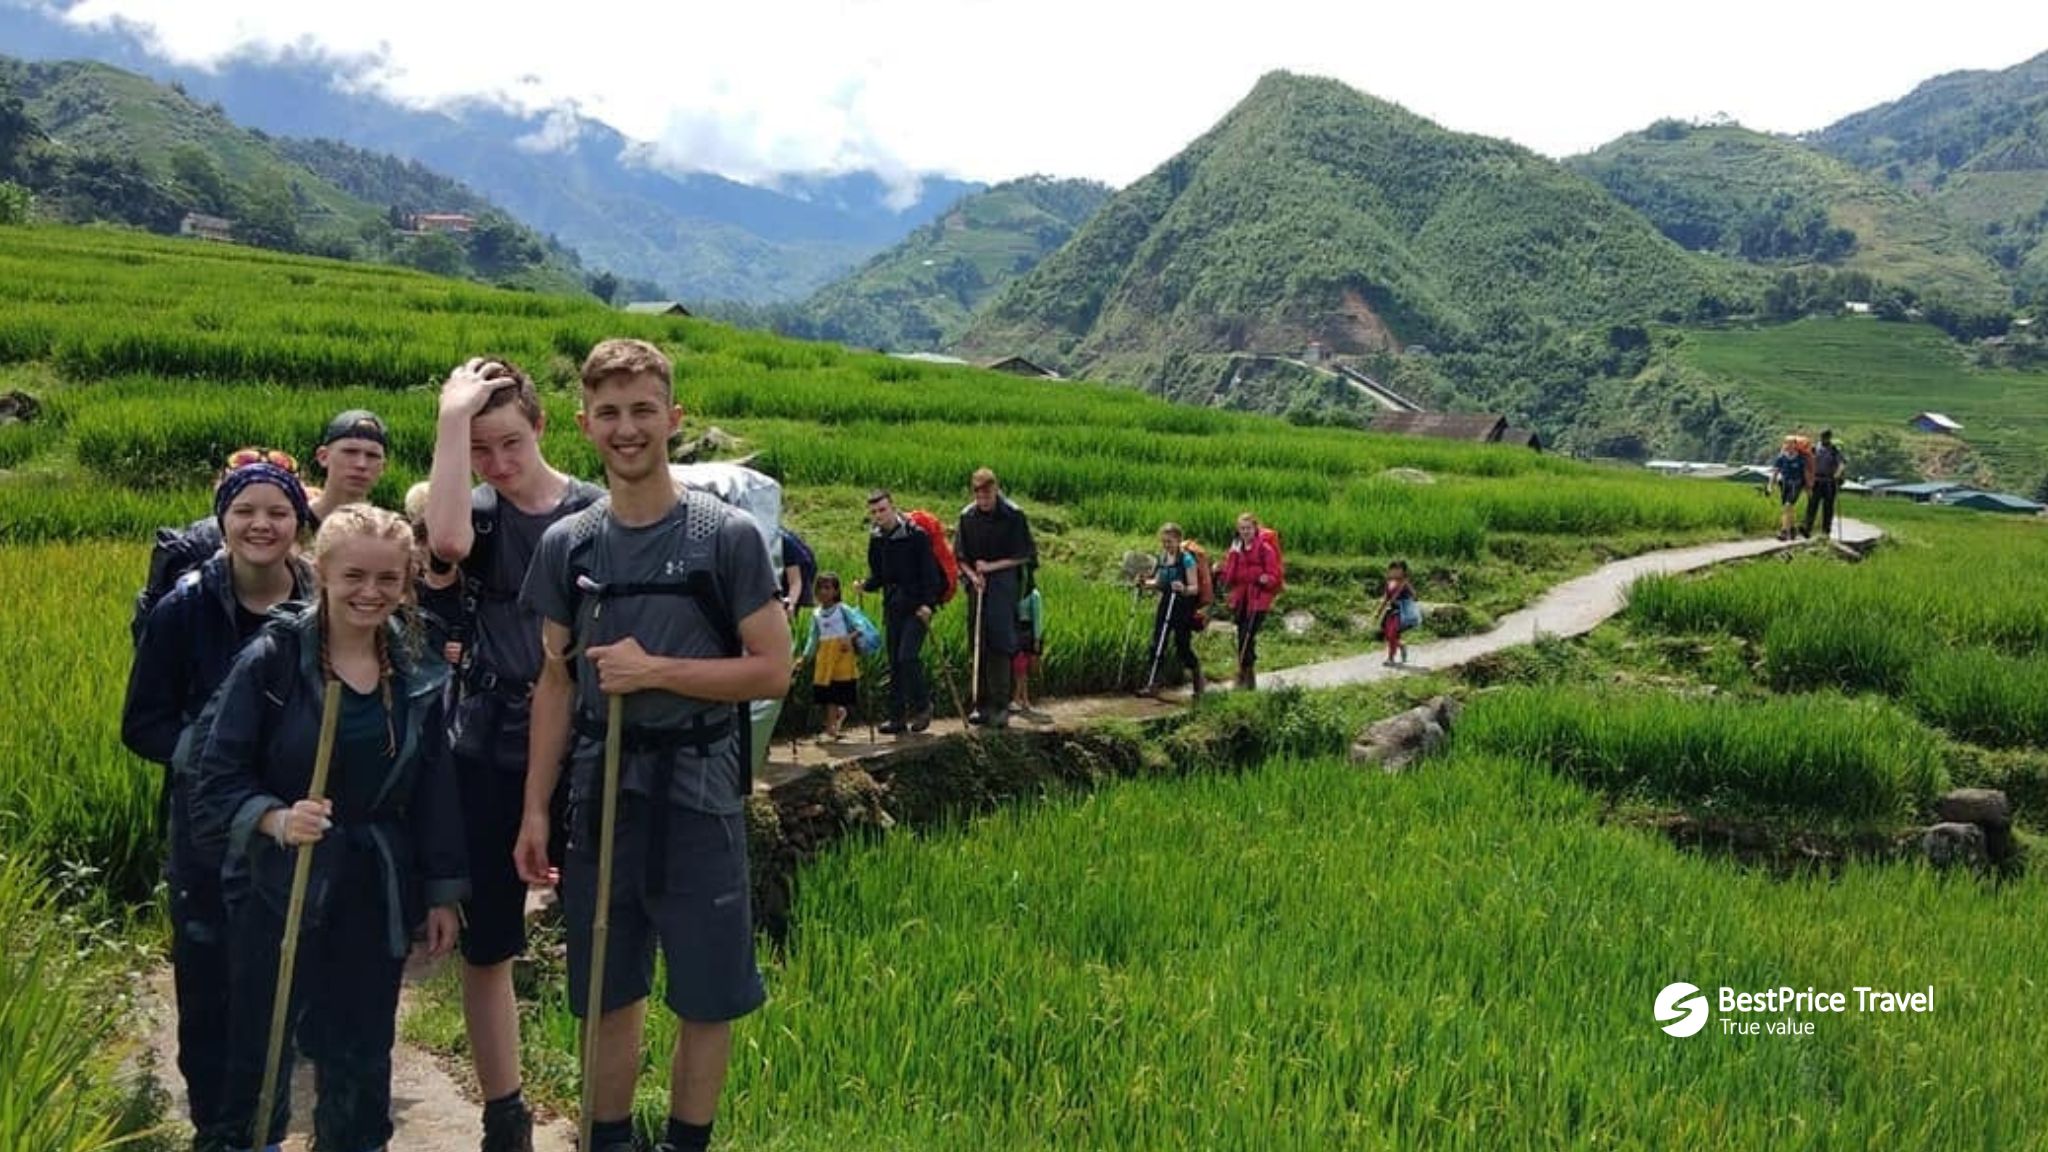 Day 4 Immerse In The Breathtaking Views Of Sapa